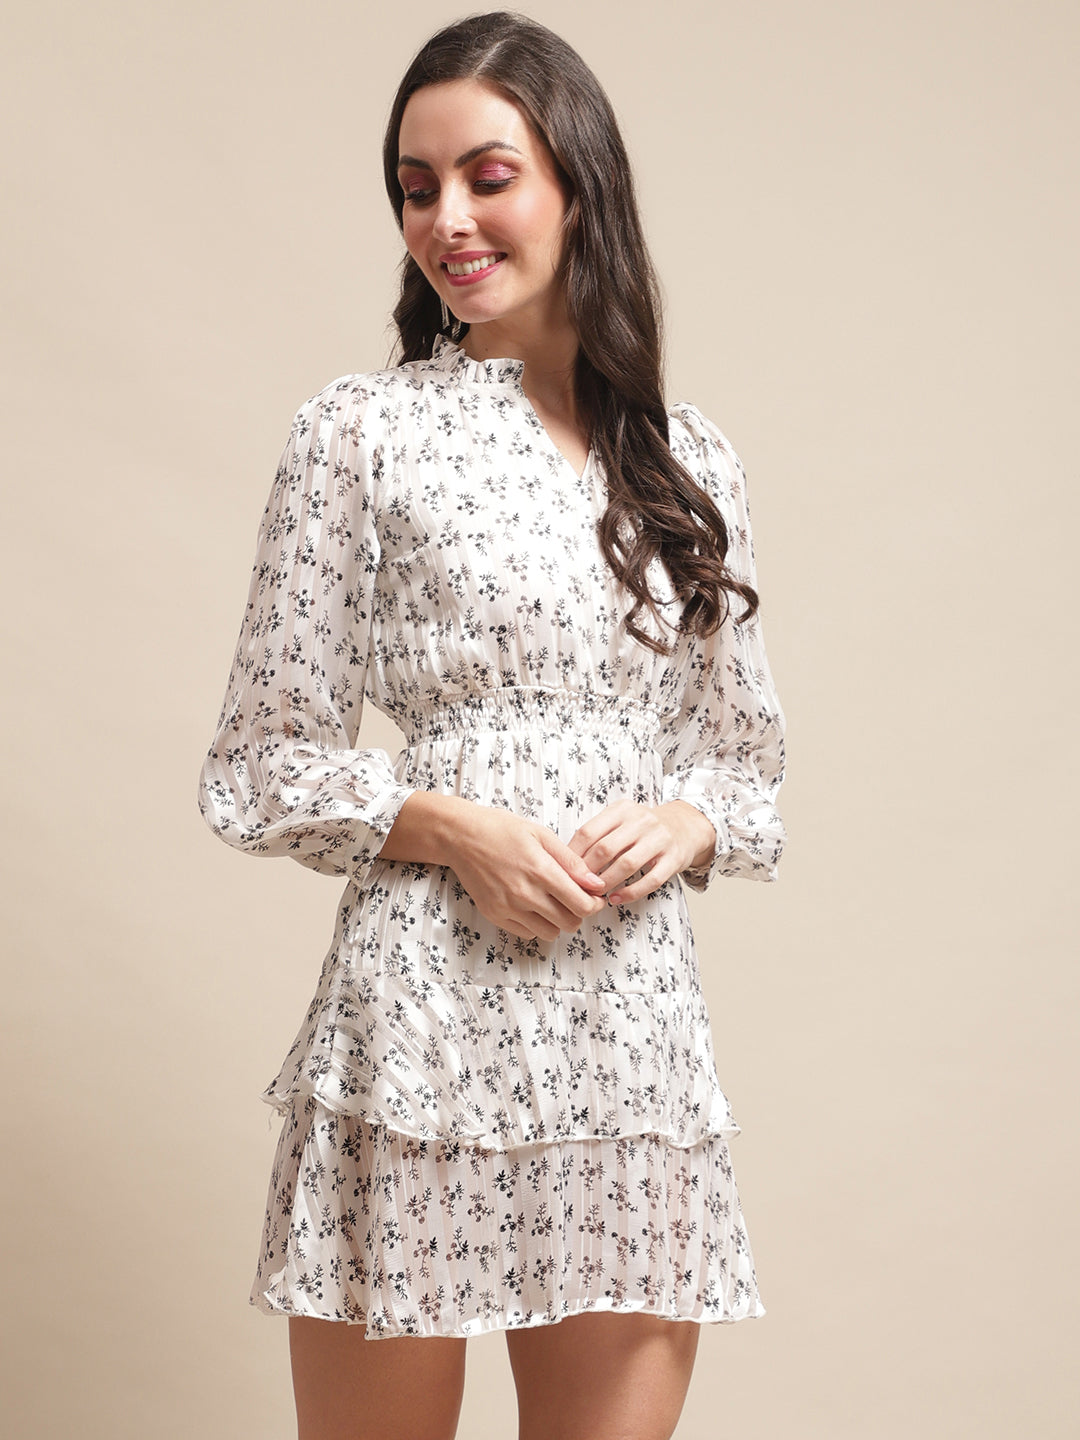 White Color Floral Printed Georgette Dress For Women Claura Designs Pvt. Ltd. Ethic dress Dresses, Floral, Georgette, Long Sleeves, Party wear, Printed, White